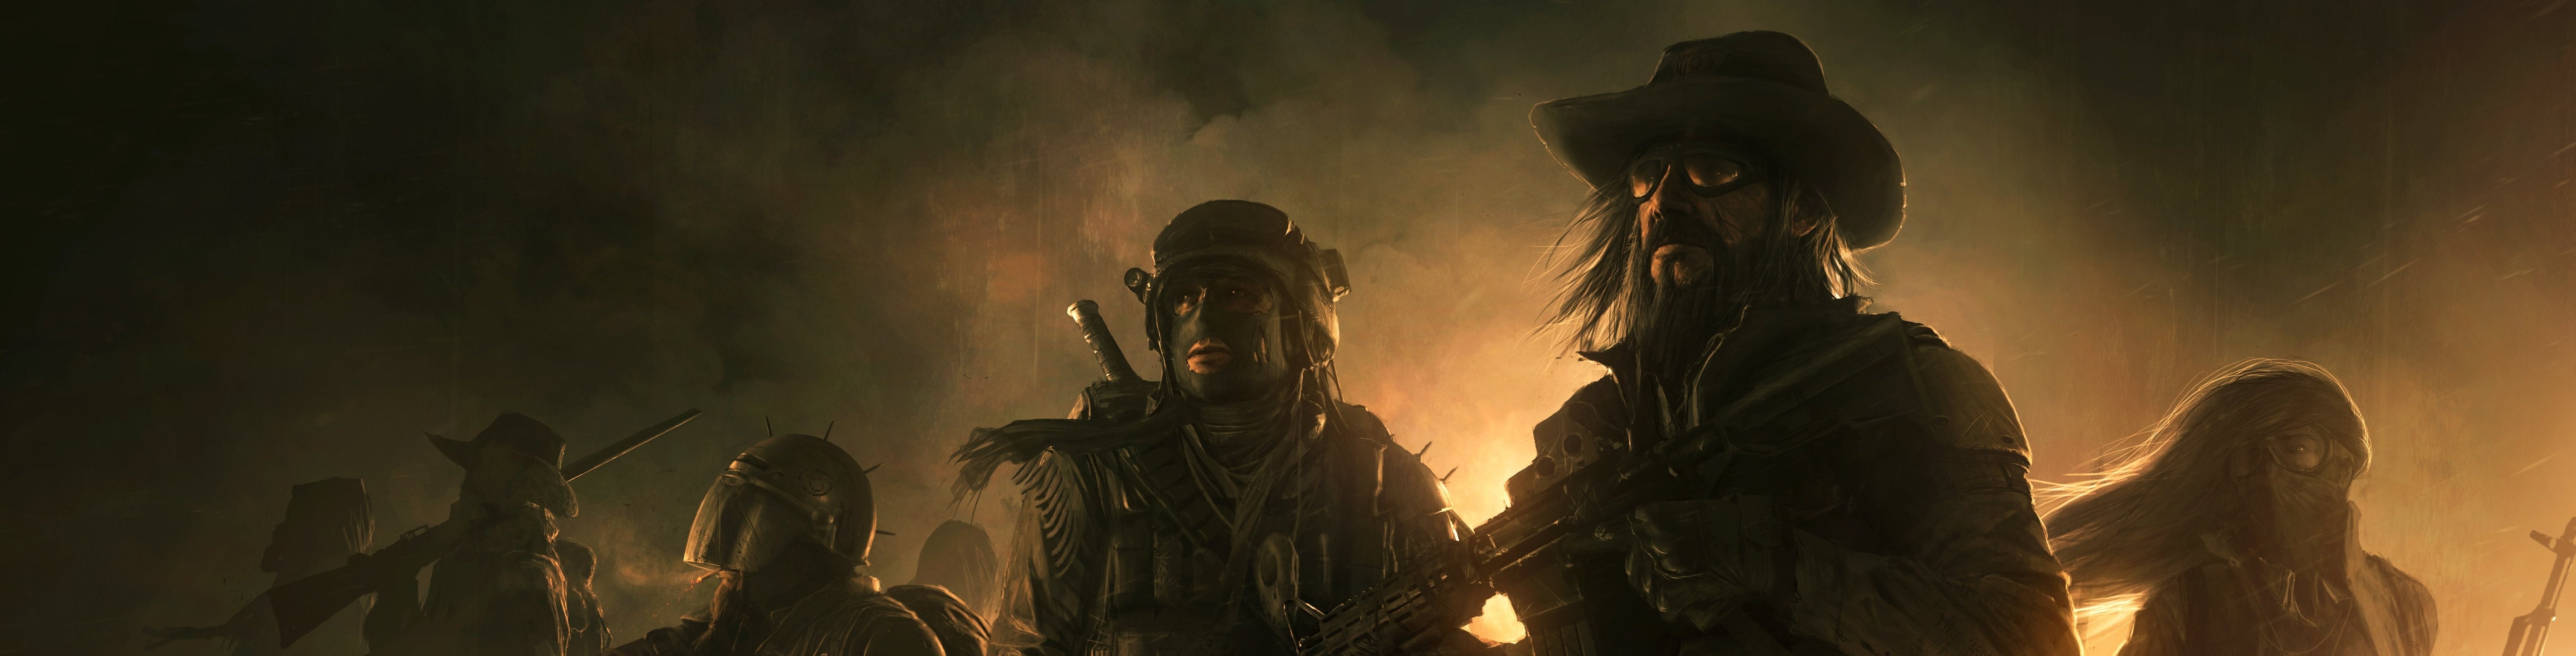 Image for The long journey of Wasteland 2